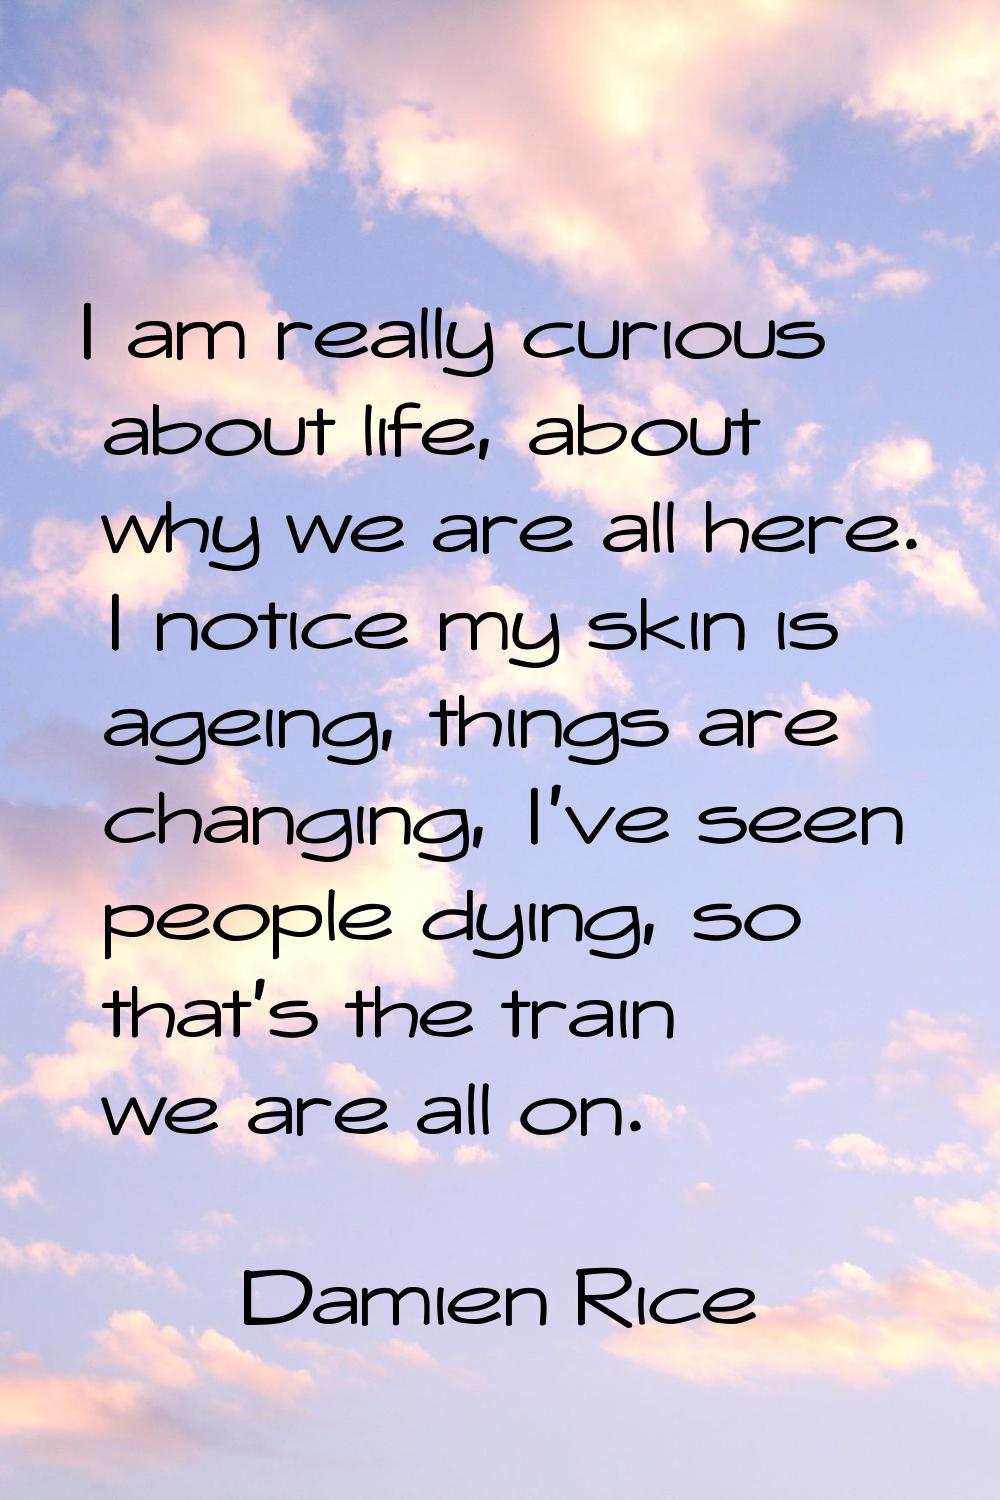 I am really curious about life, about why we are all here. I notice my skin is ageing, things are c